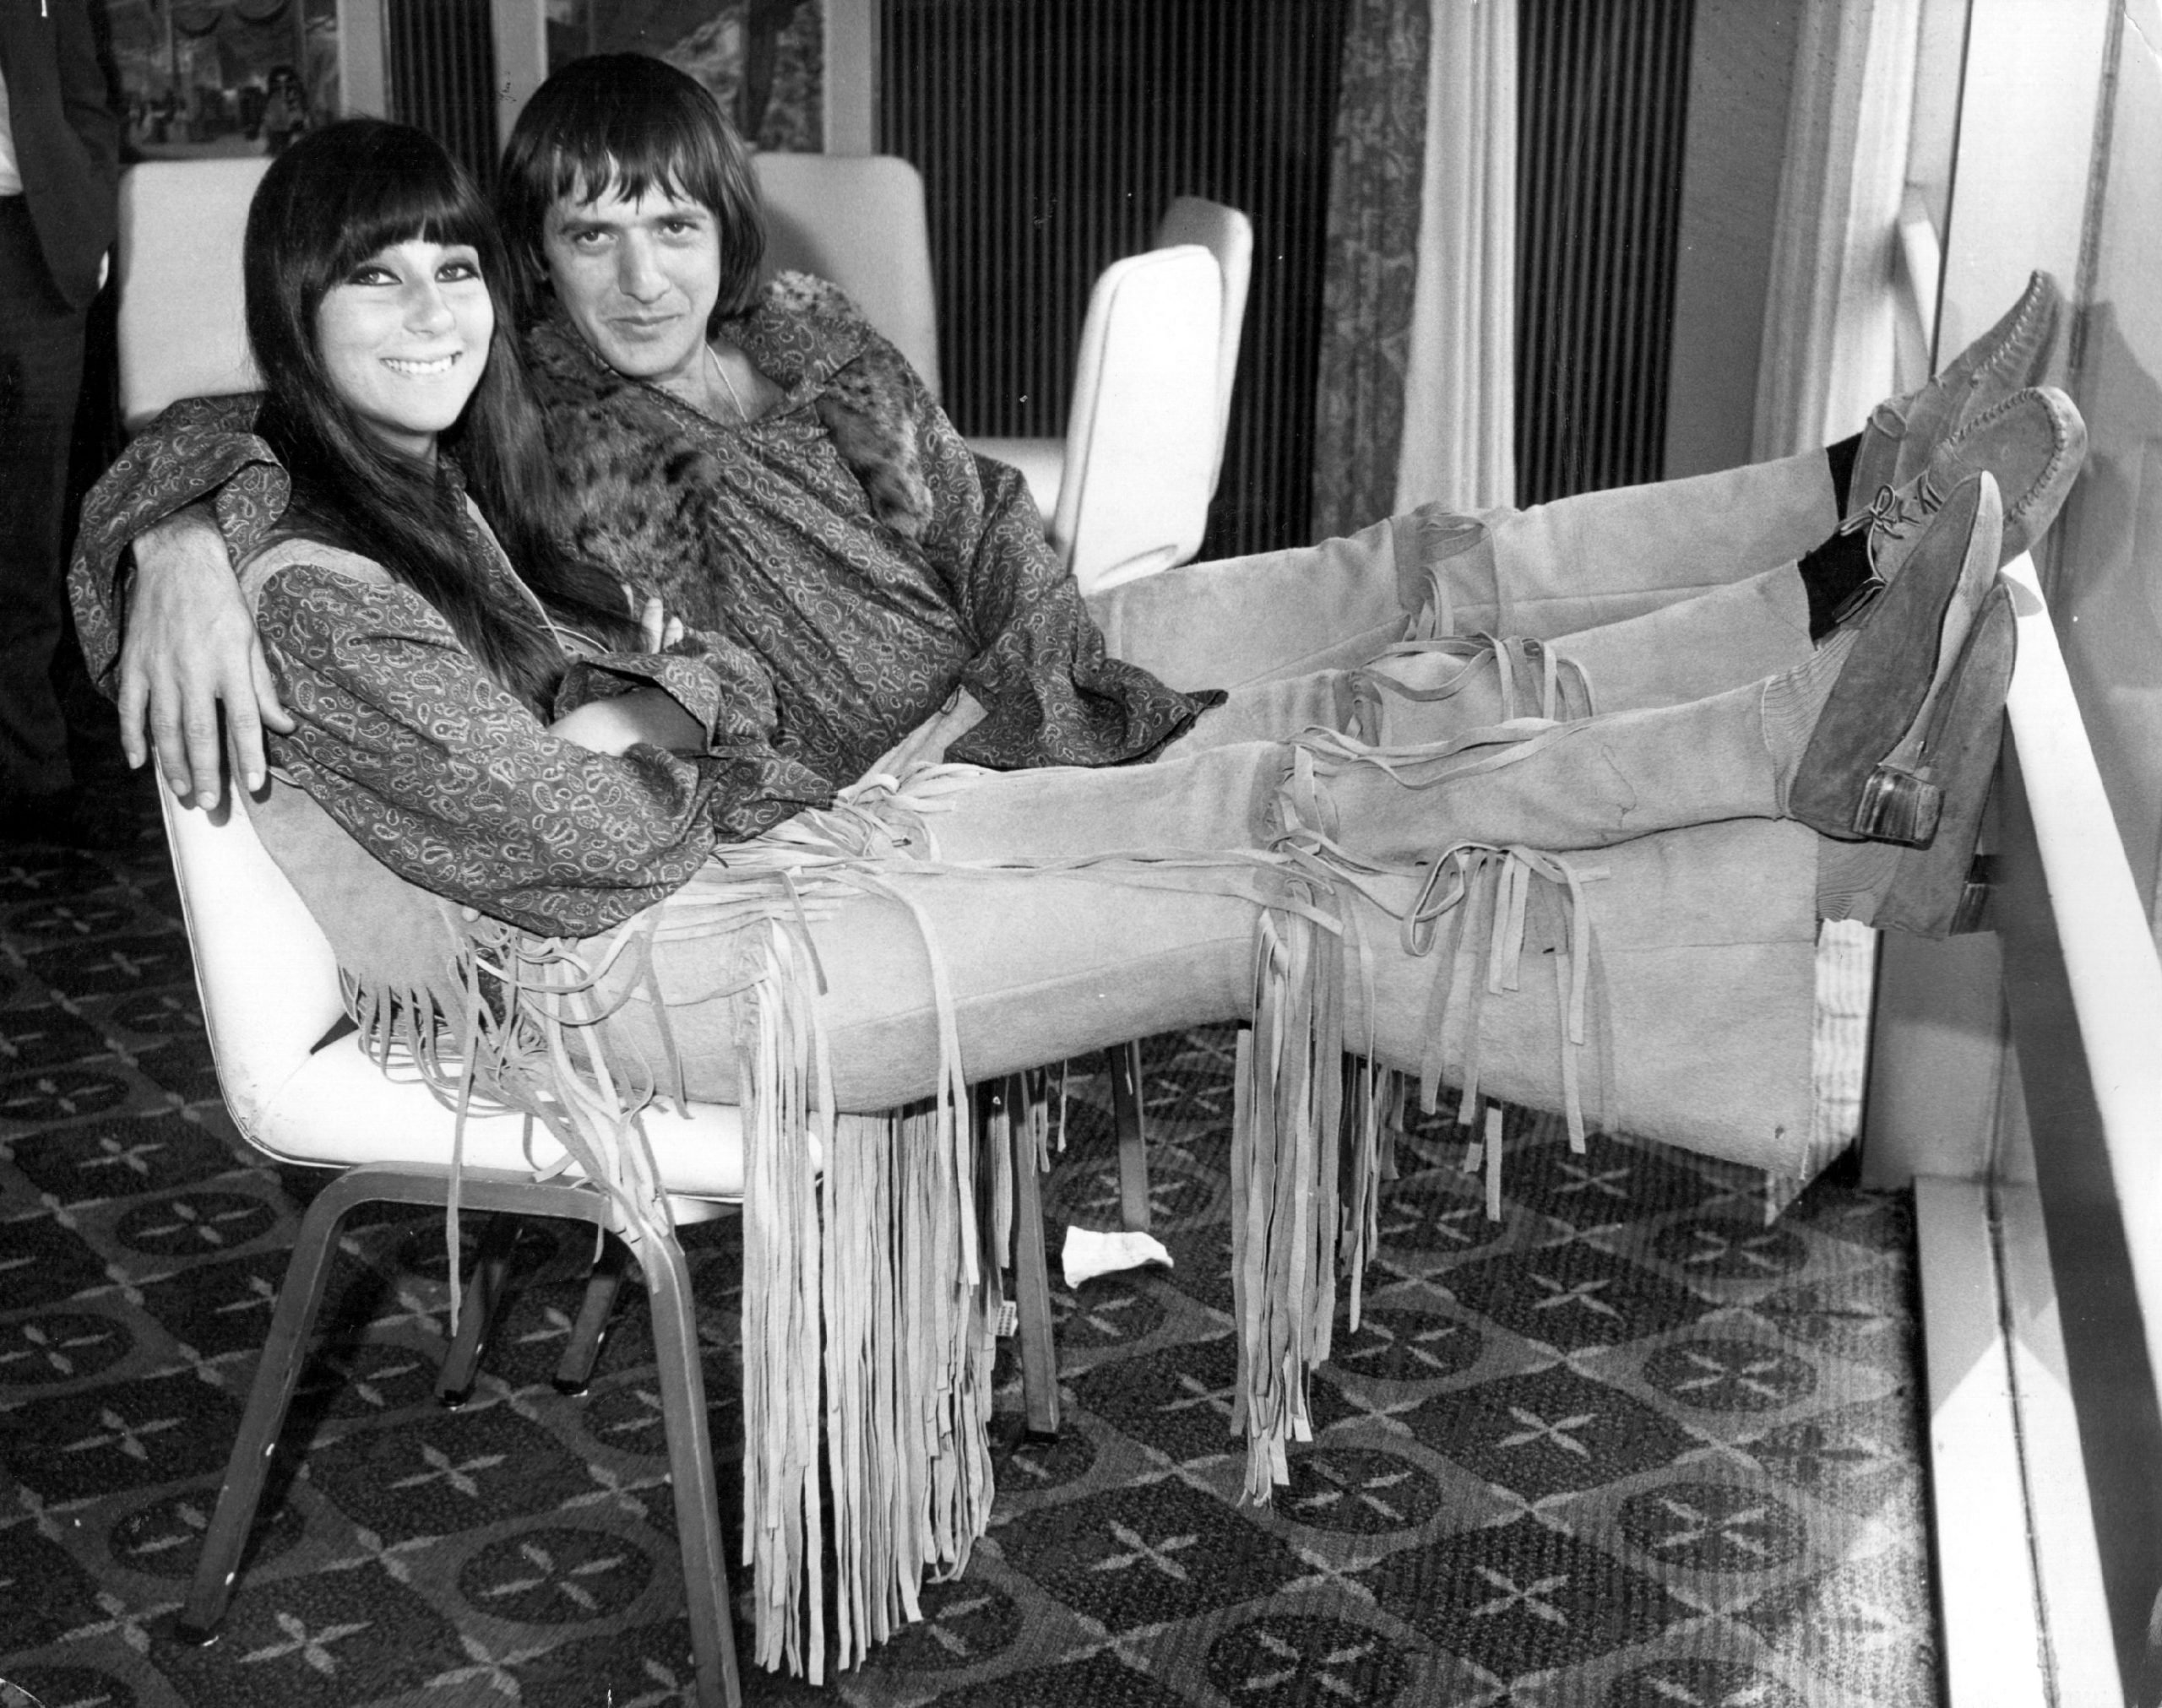 Sonny & Cher on a chair